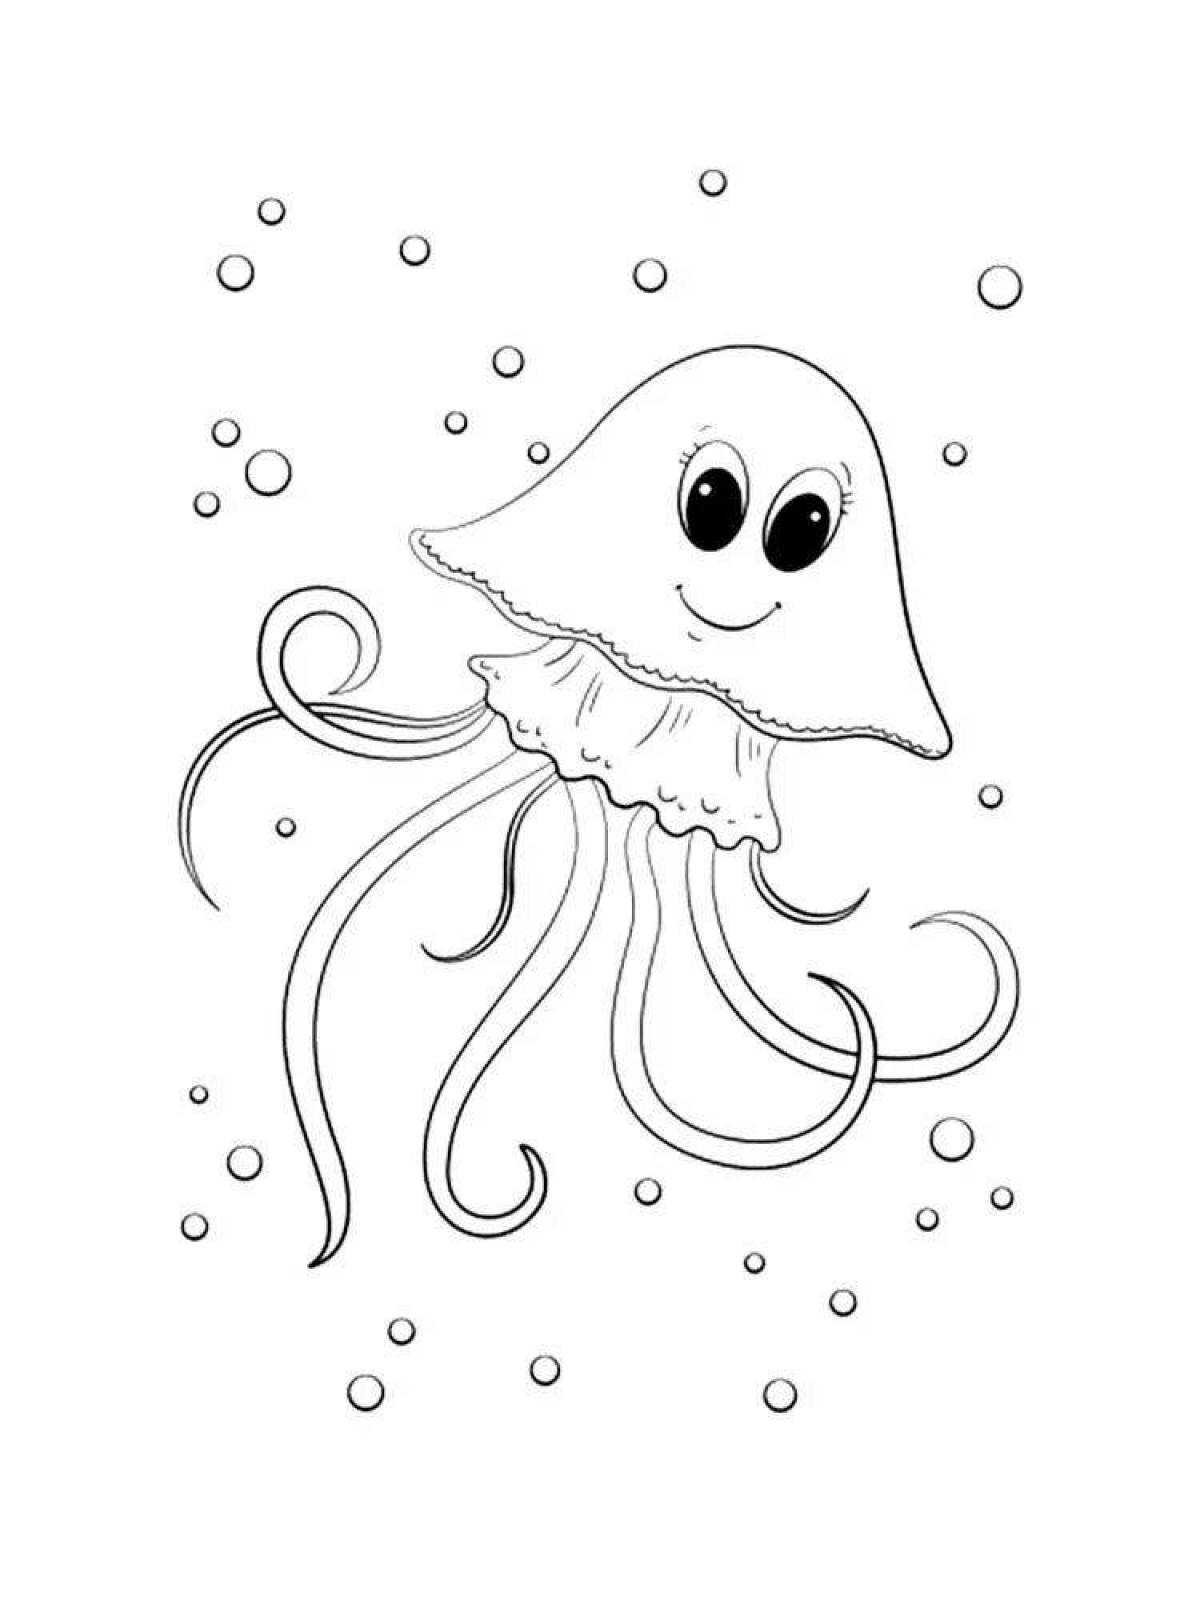 Cute jellyfish coloring book for kids